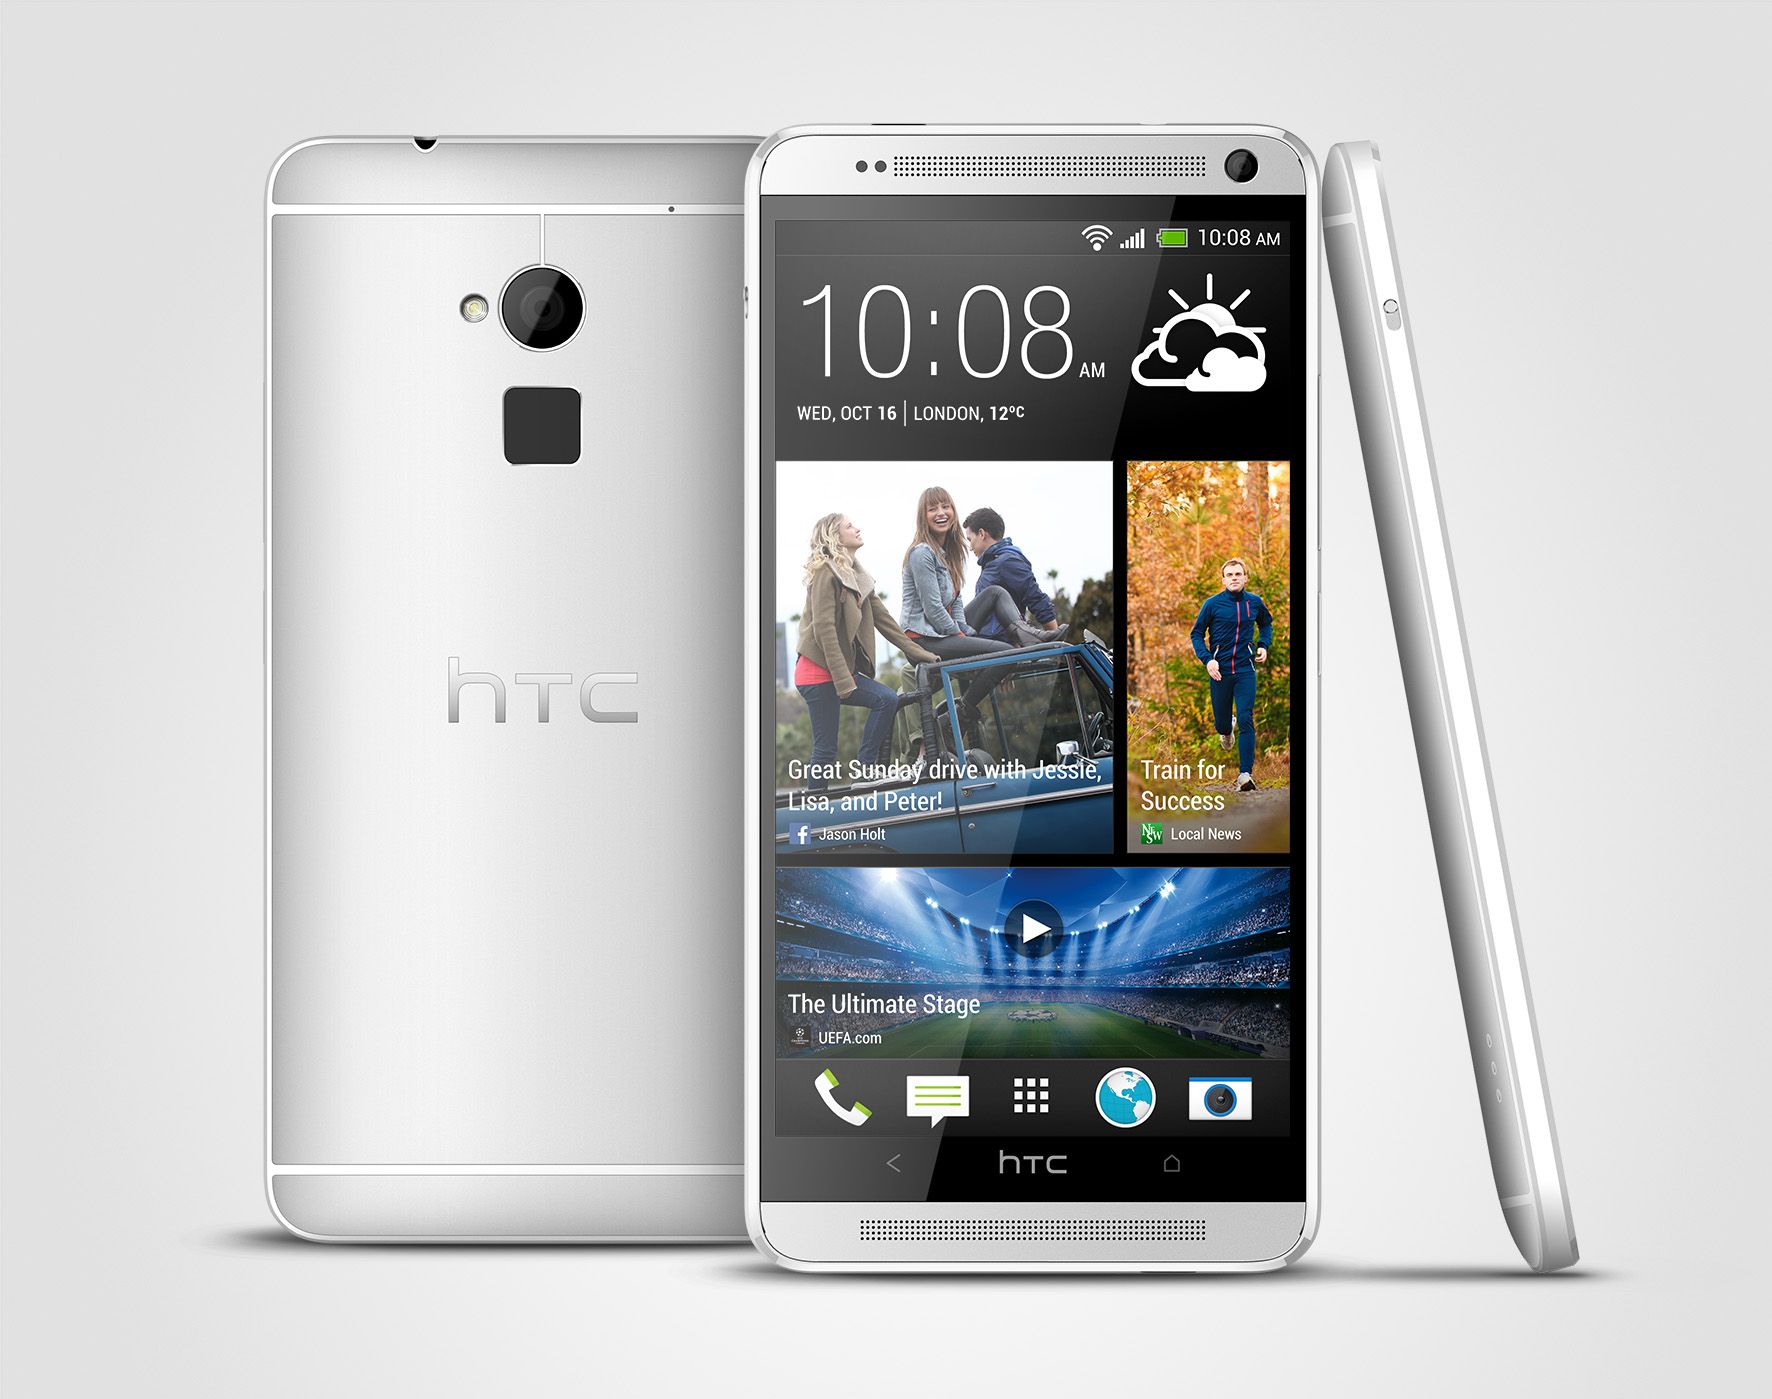 htc one max officially announced 5 9 inch handset debuts sense 5 5 image 1